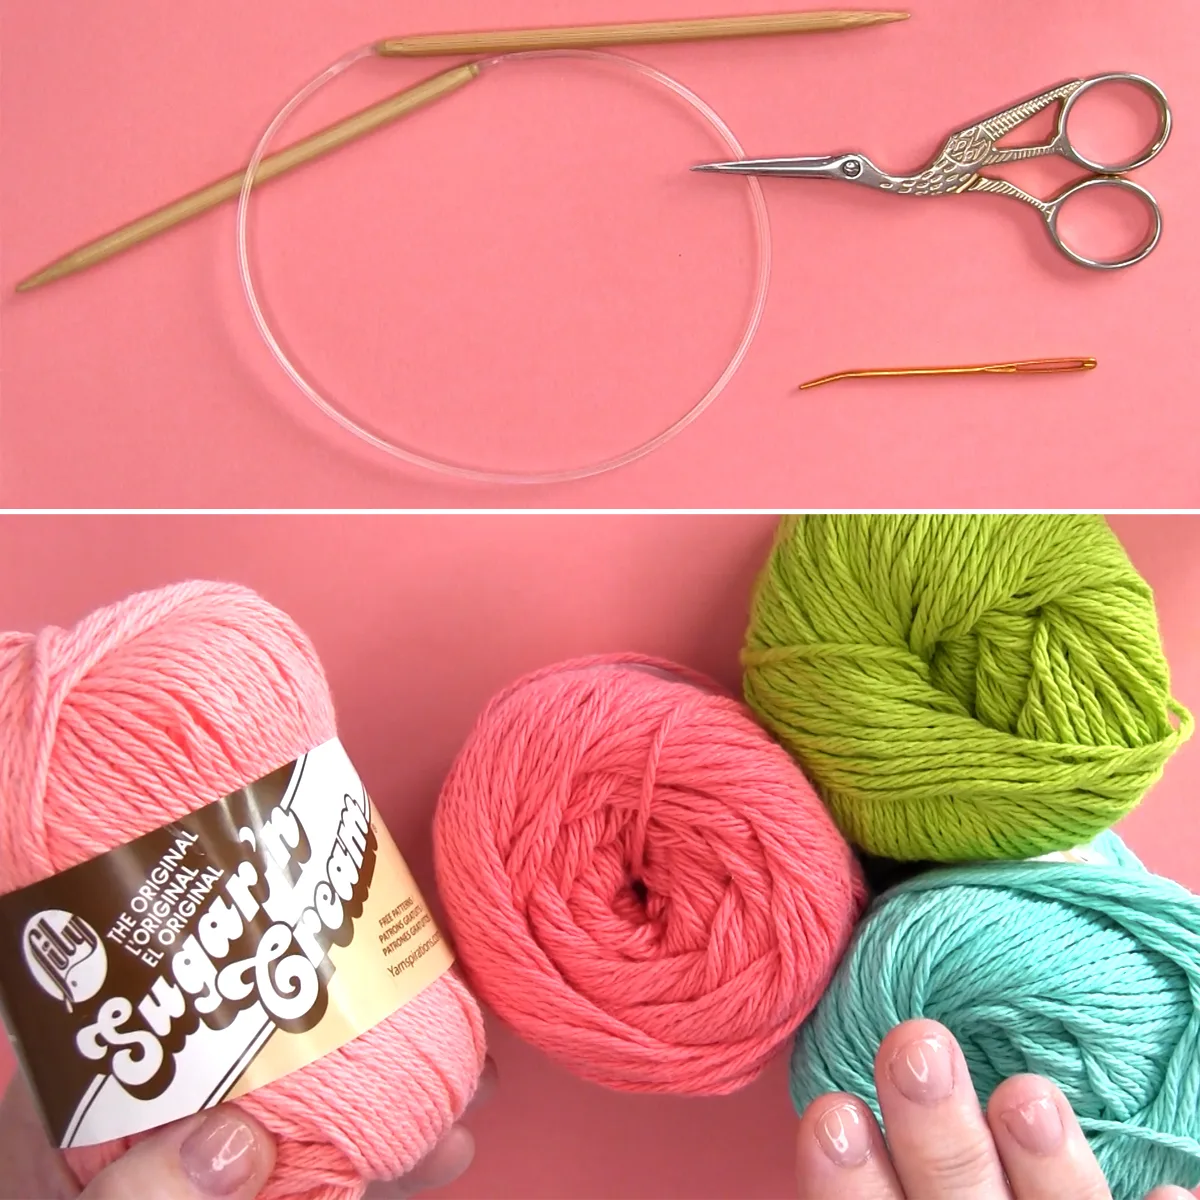 Knitting supplies of circular needle, tapestry needle, scissors, and cotton yarn by Sugar 'n Cream.